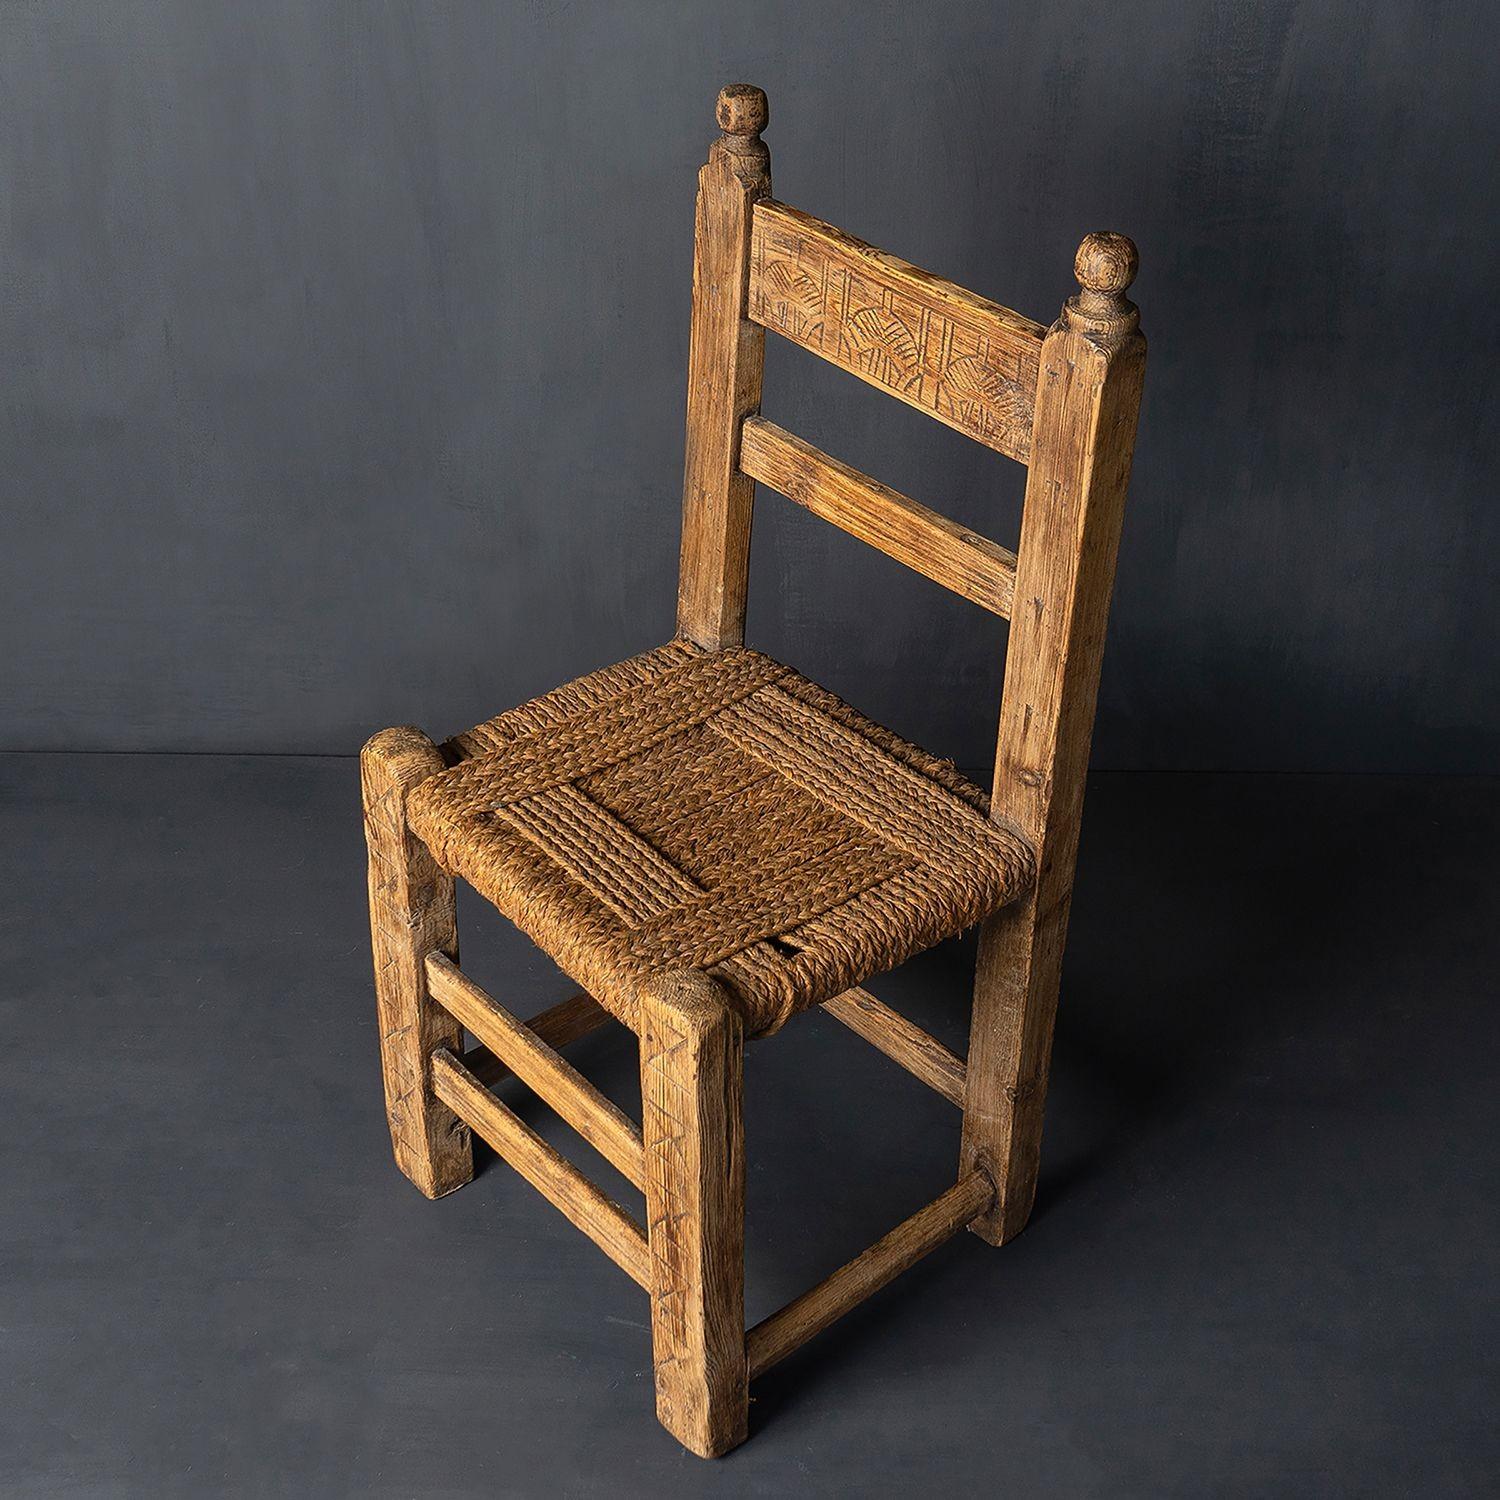 ANTIQUE FARMHOUSE CHAIR
Chip-carved wooden frame with woven rush seat.
It is in very good vintage condition, the joints all seem good as does the seat. There is some cosmetic wear commensurate with age which we think adds to its chairs and tells its